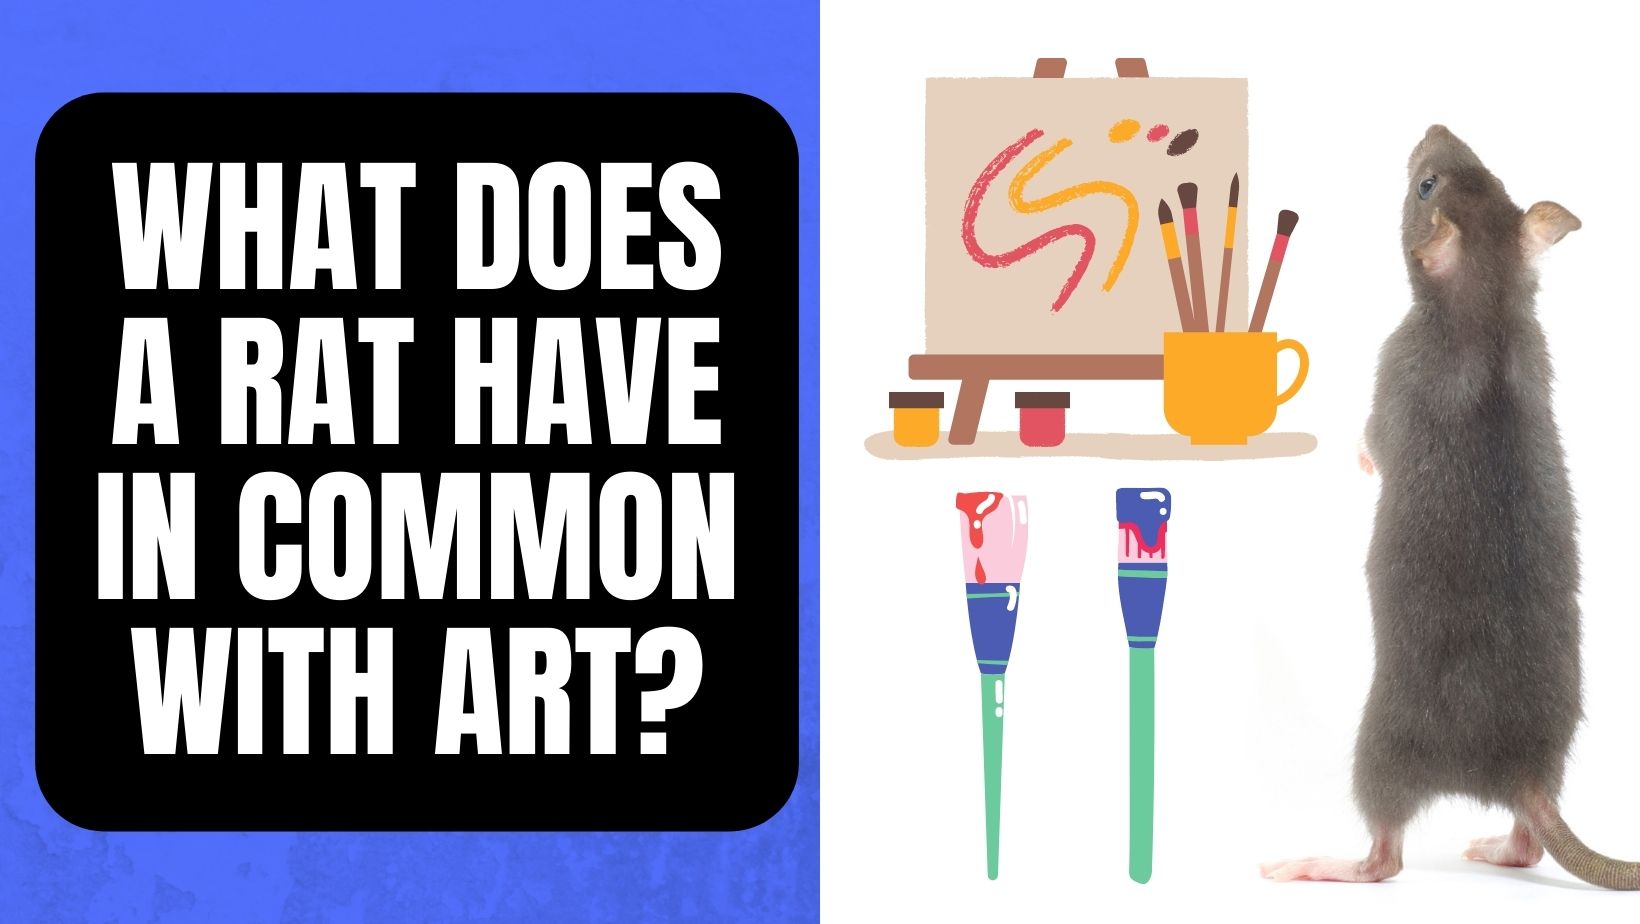 What Is Common is Rat and Art?